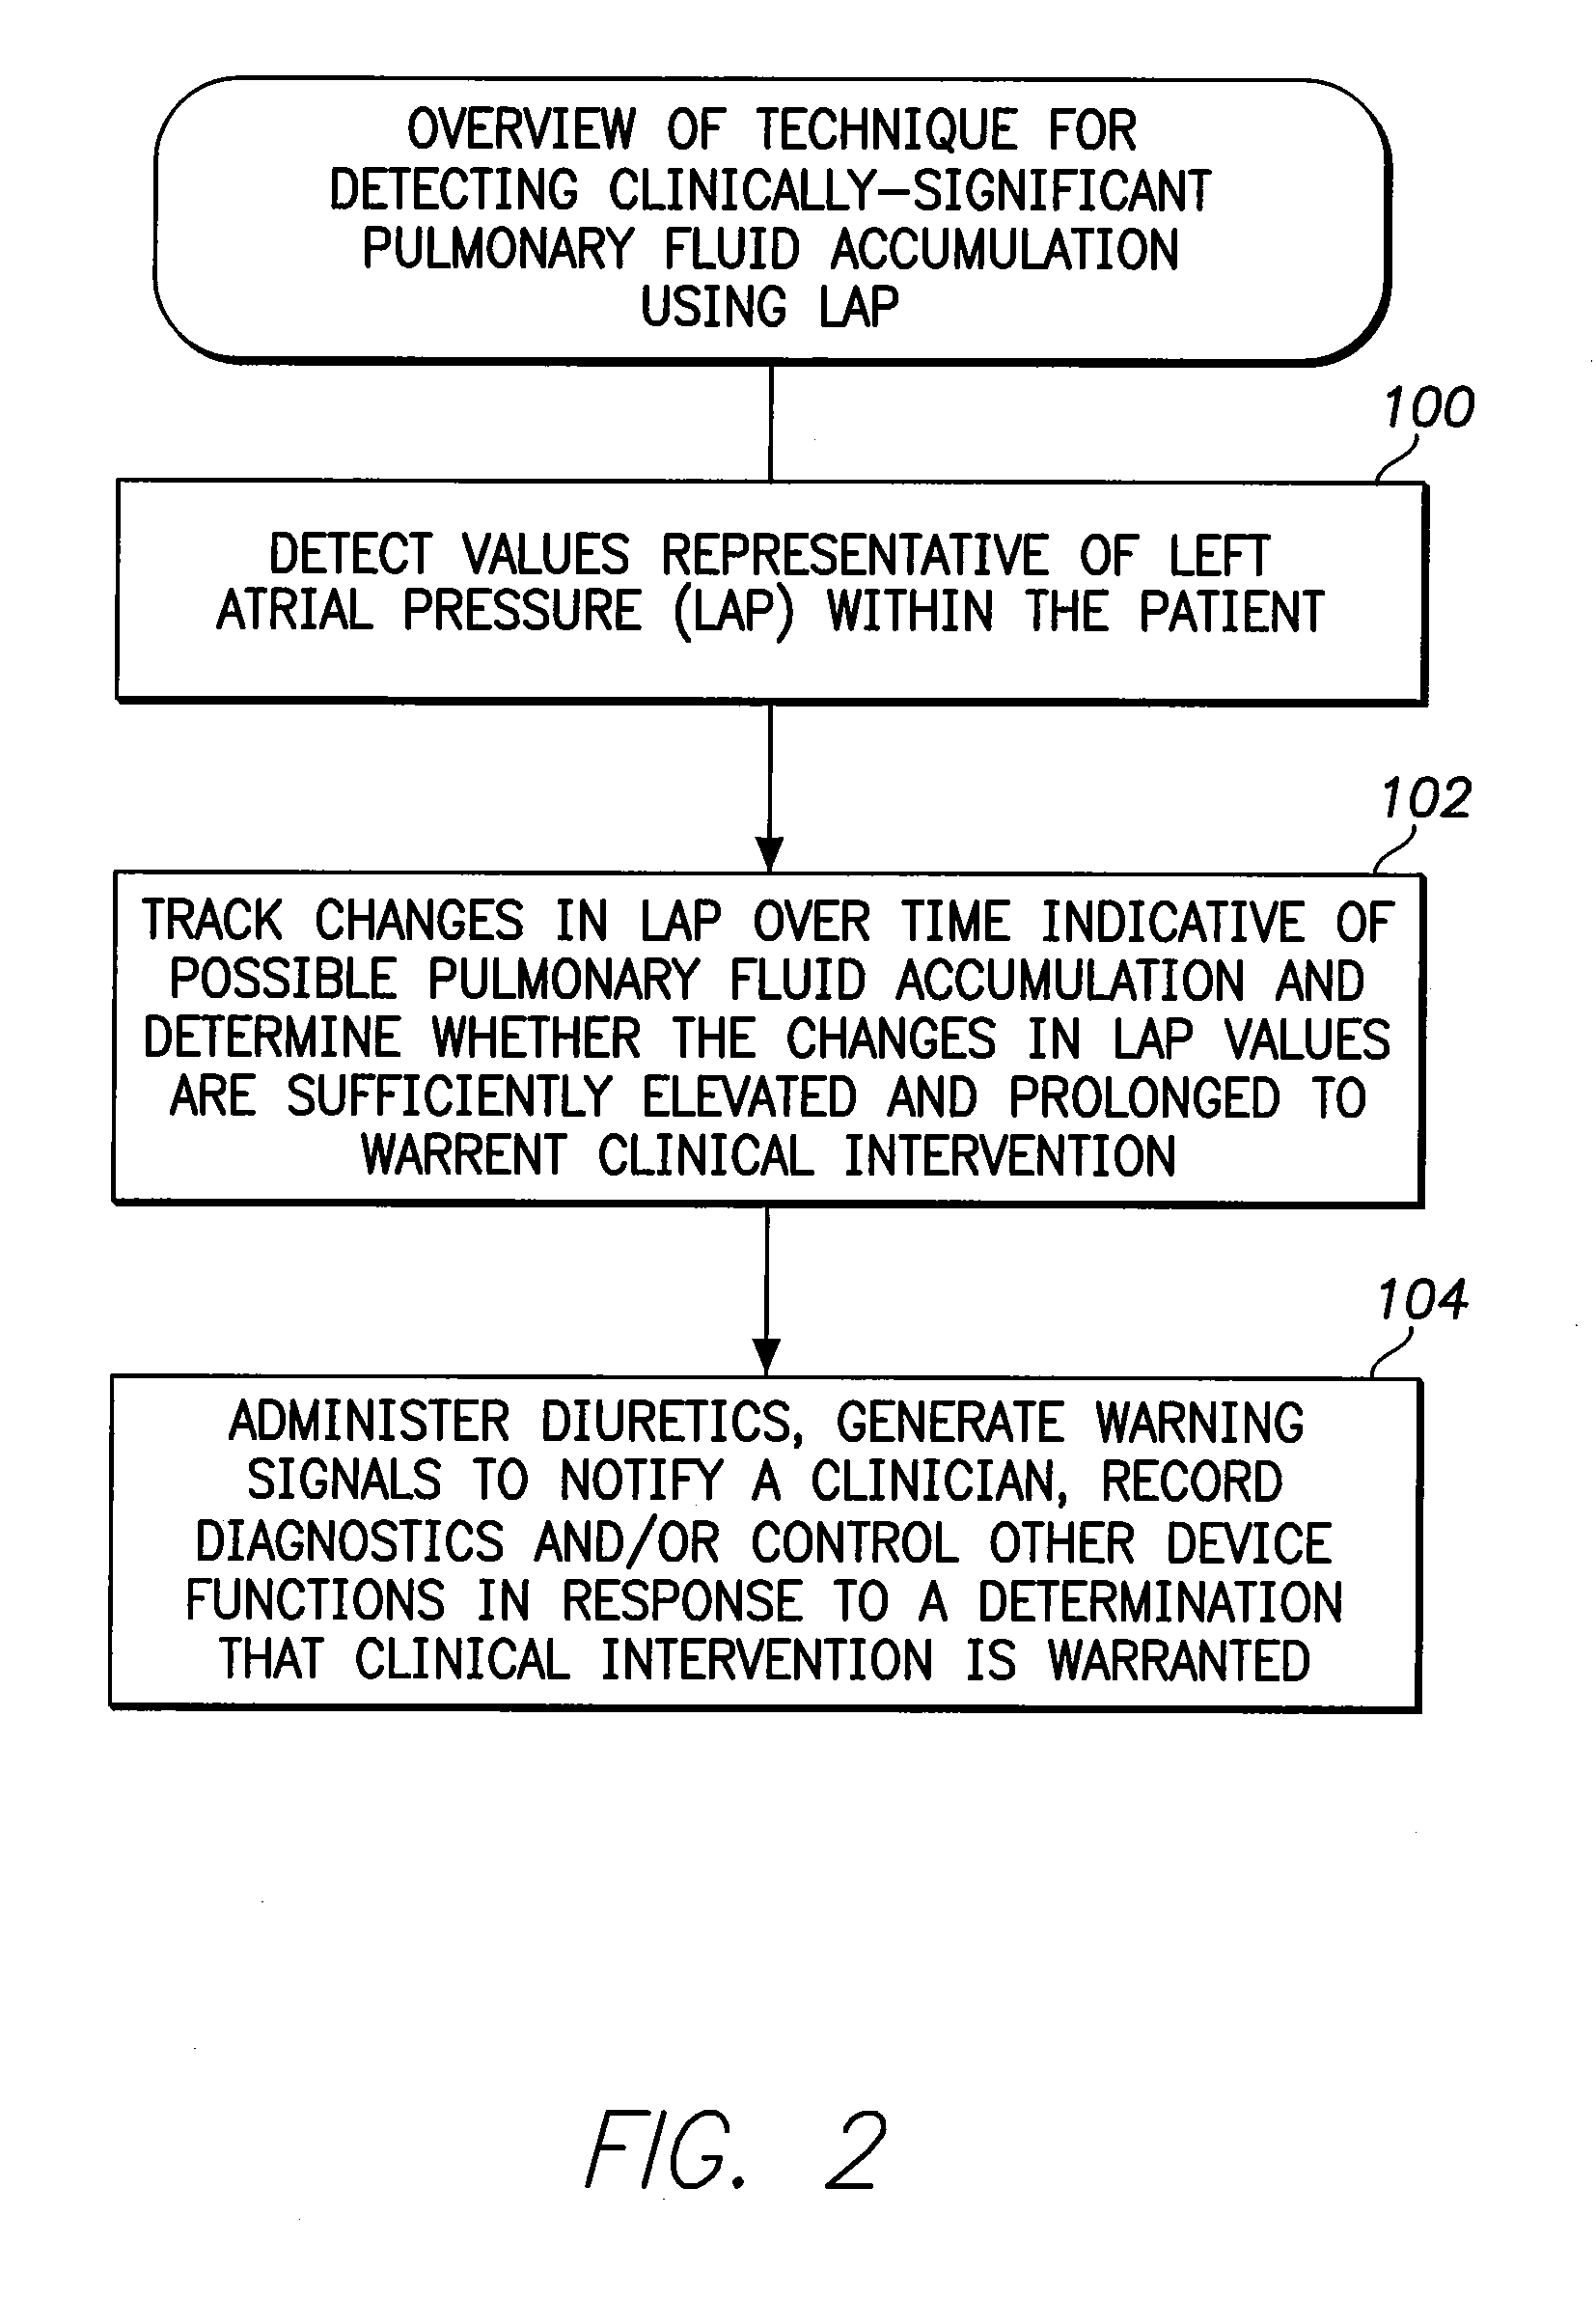 System and Method for Detecting a Clinically-Significant Pulmonary Fluid Accumulation Using an Implantable Medical Device